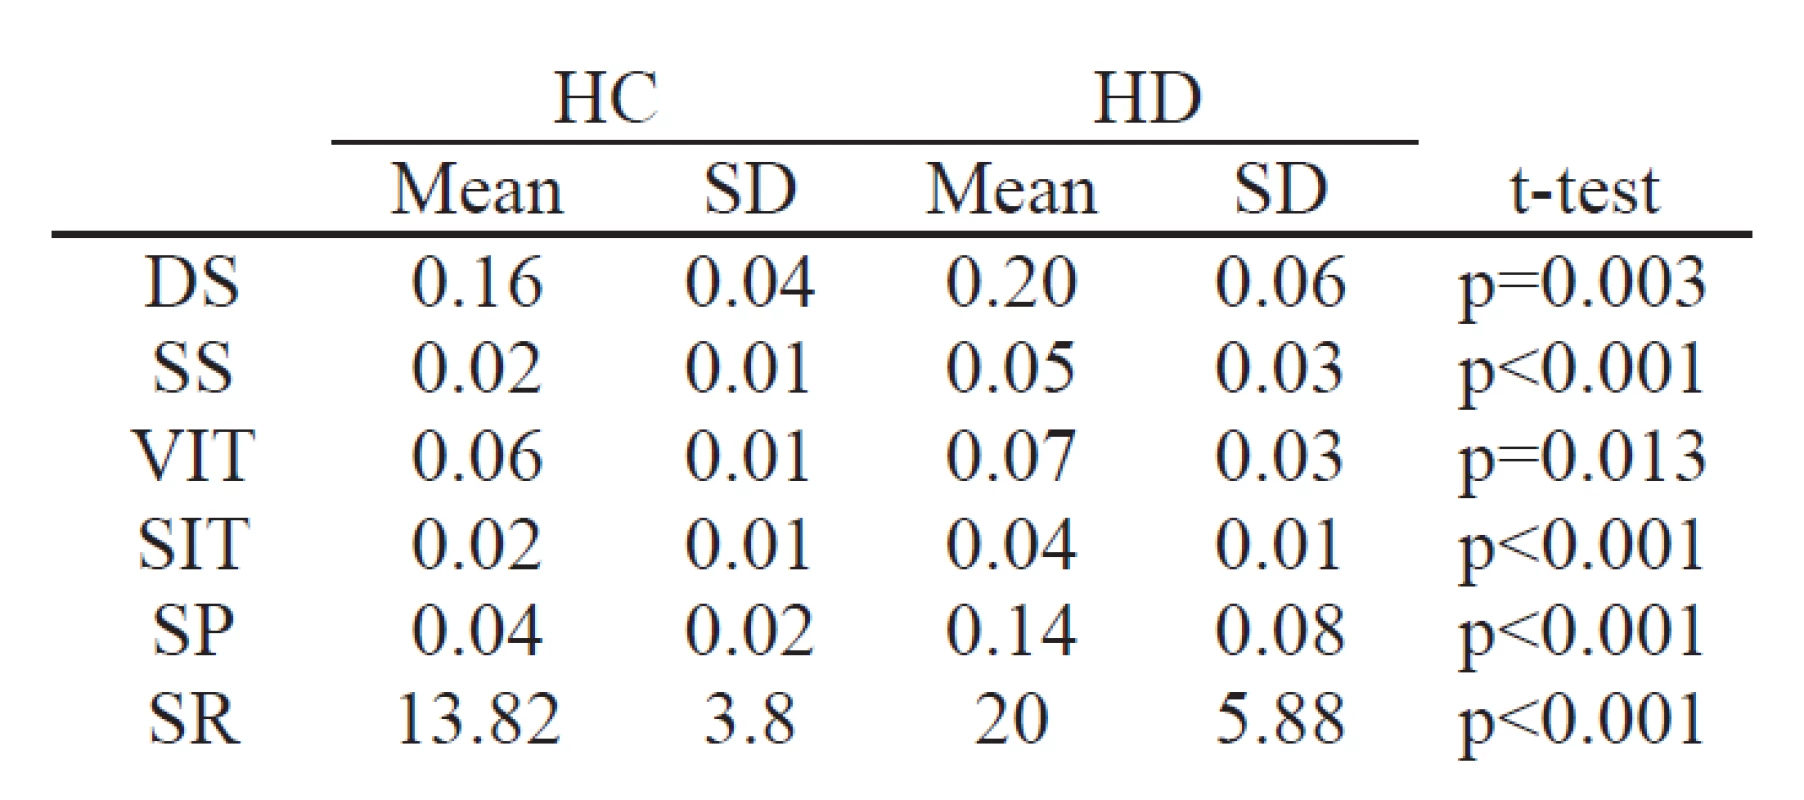 Feature characteristics and statistical significance within the groups HC and HD.